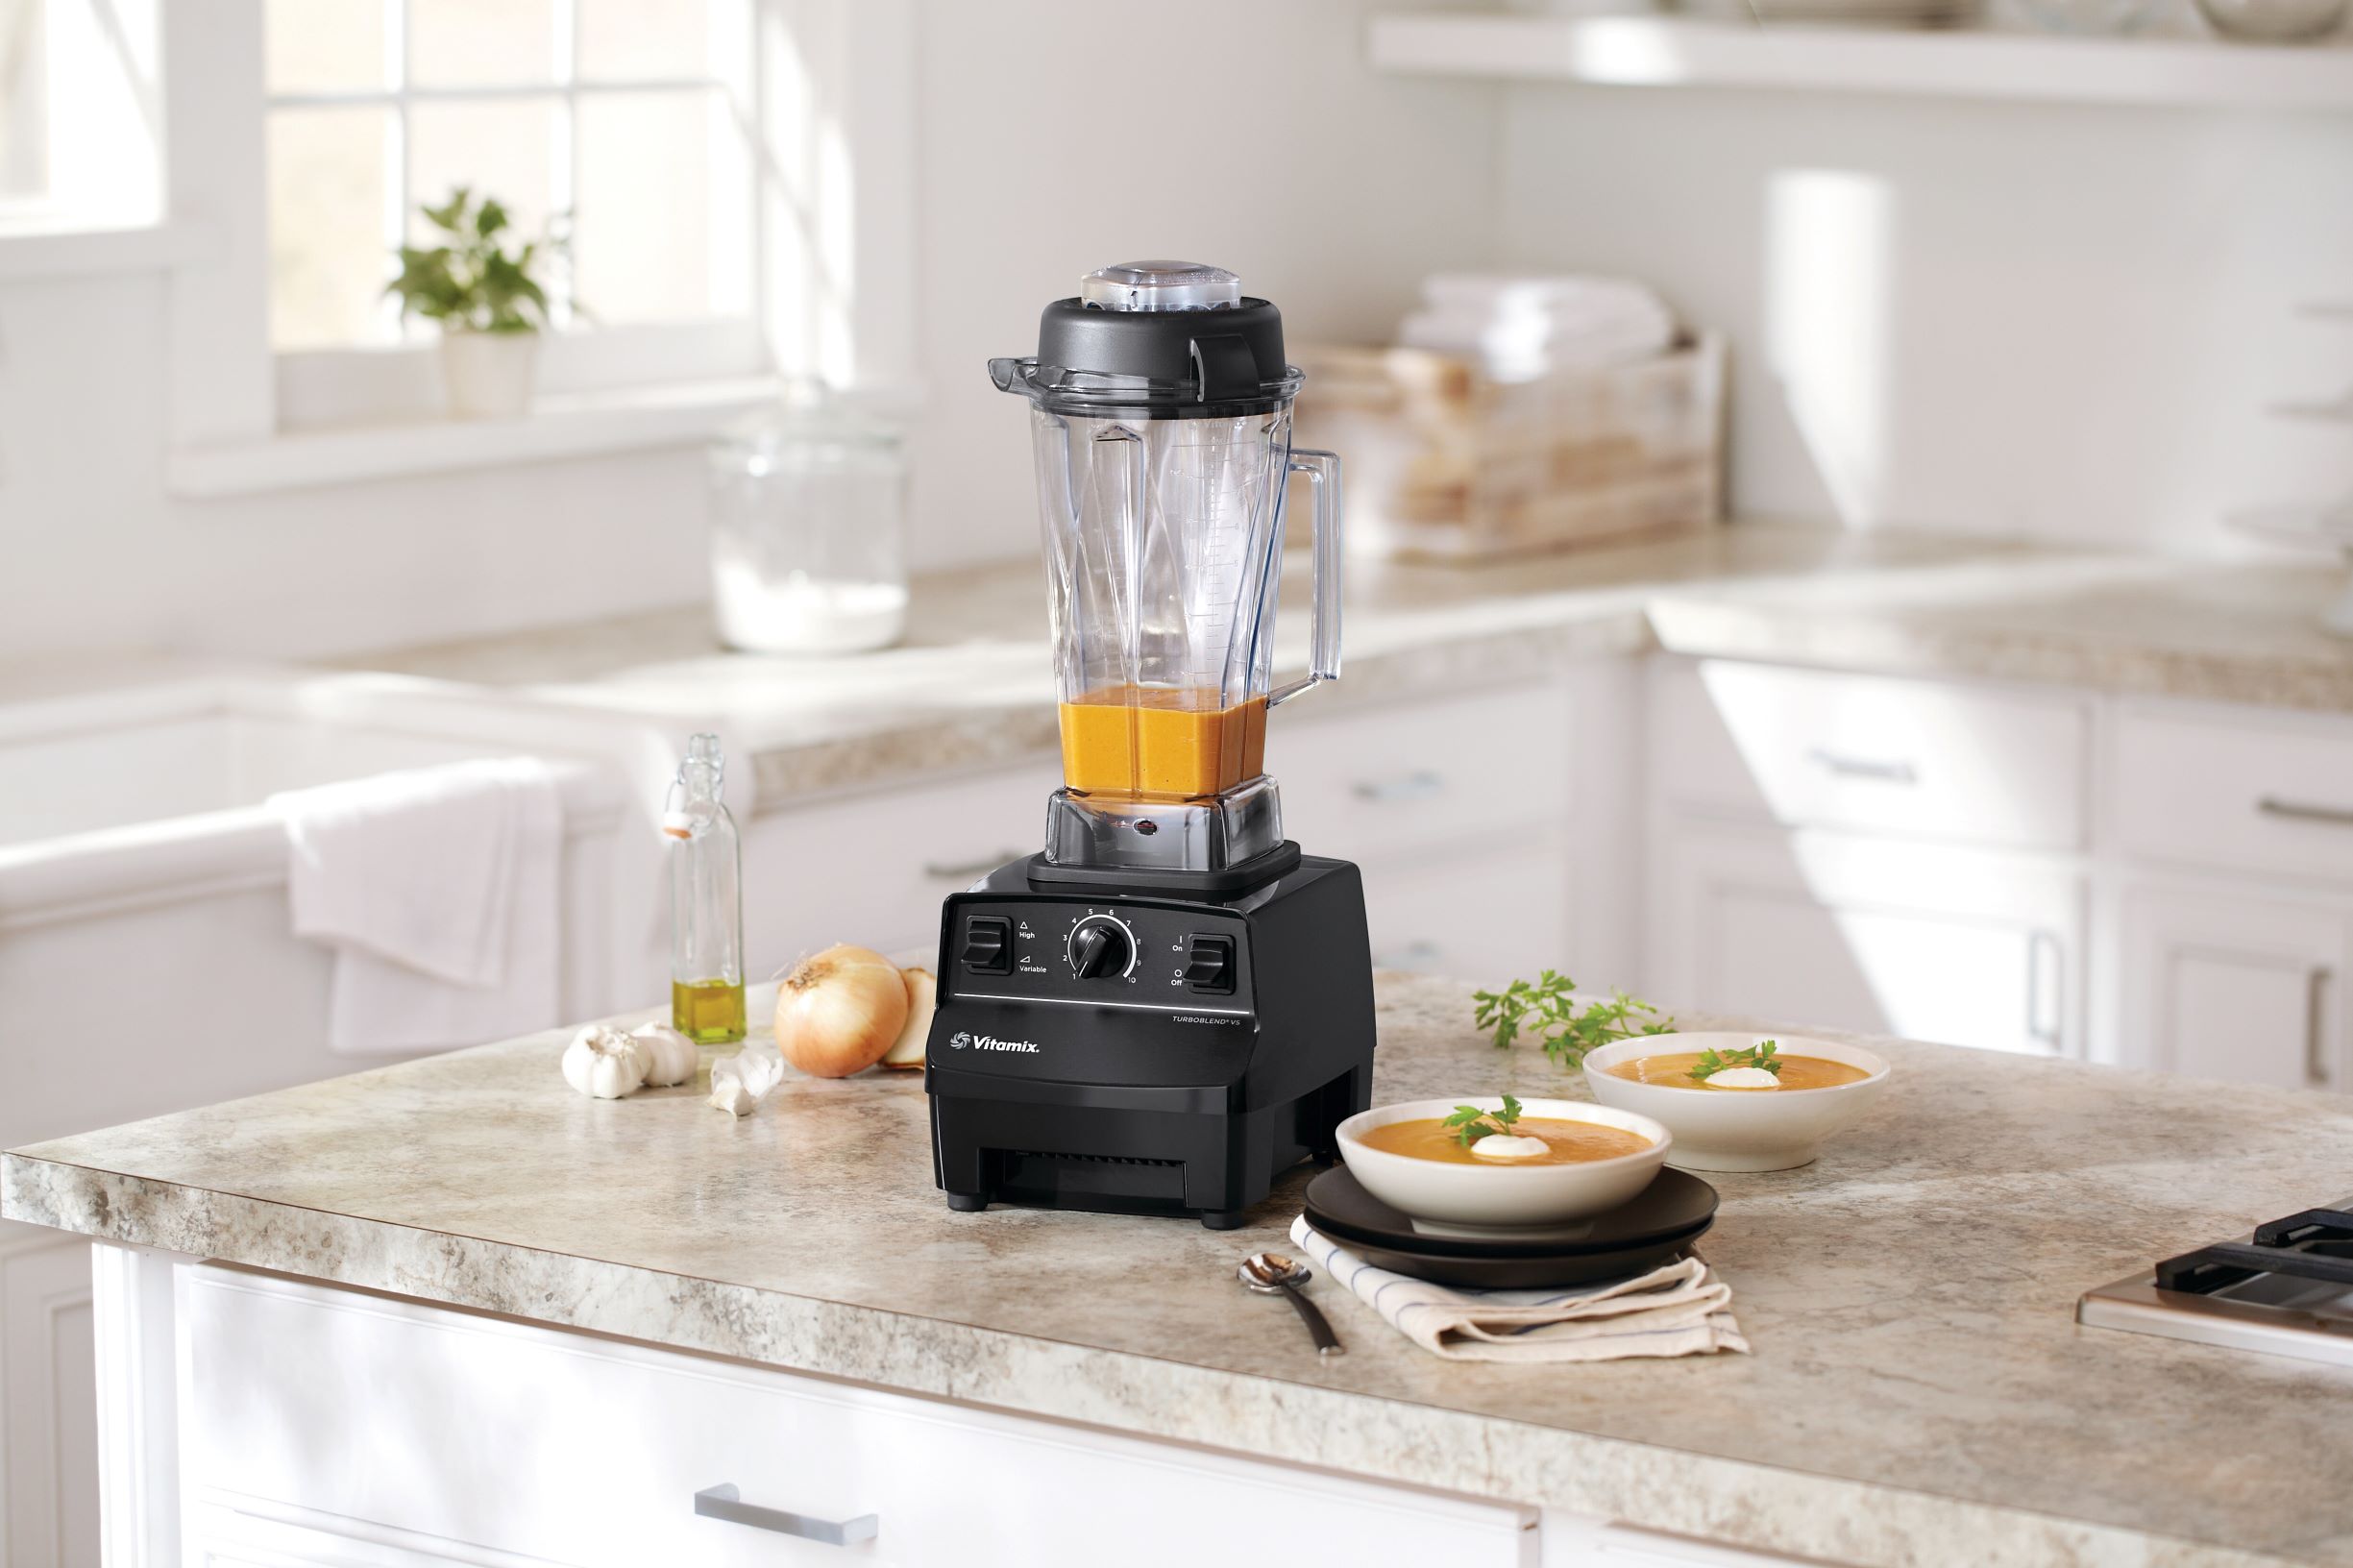 The top 3 kitchen appliances in a healthy kitchen